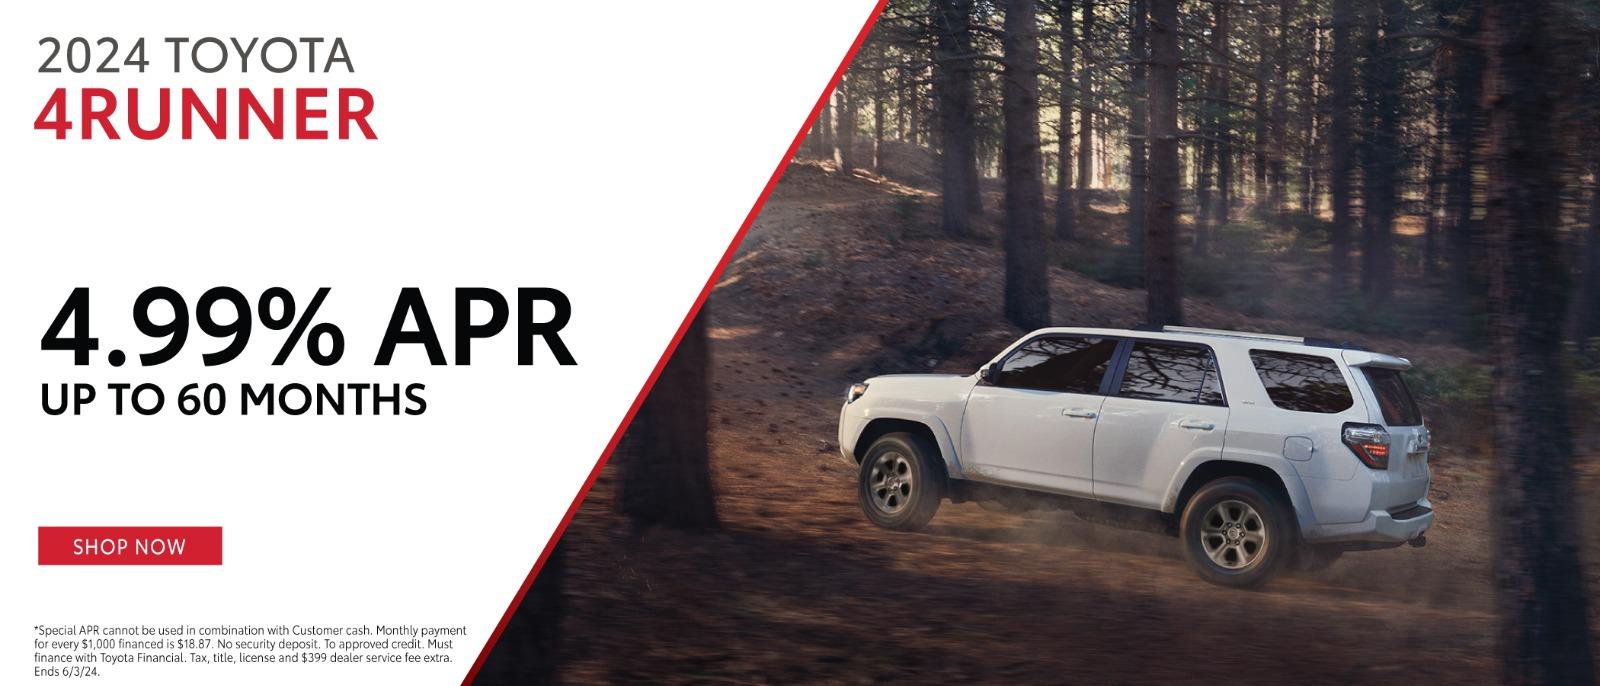 2024 Toyota 4Runner 4.99% APR Up to 60months